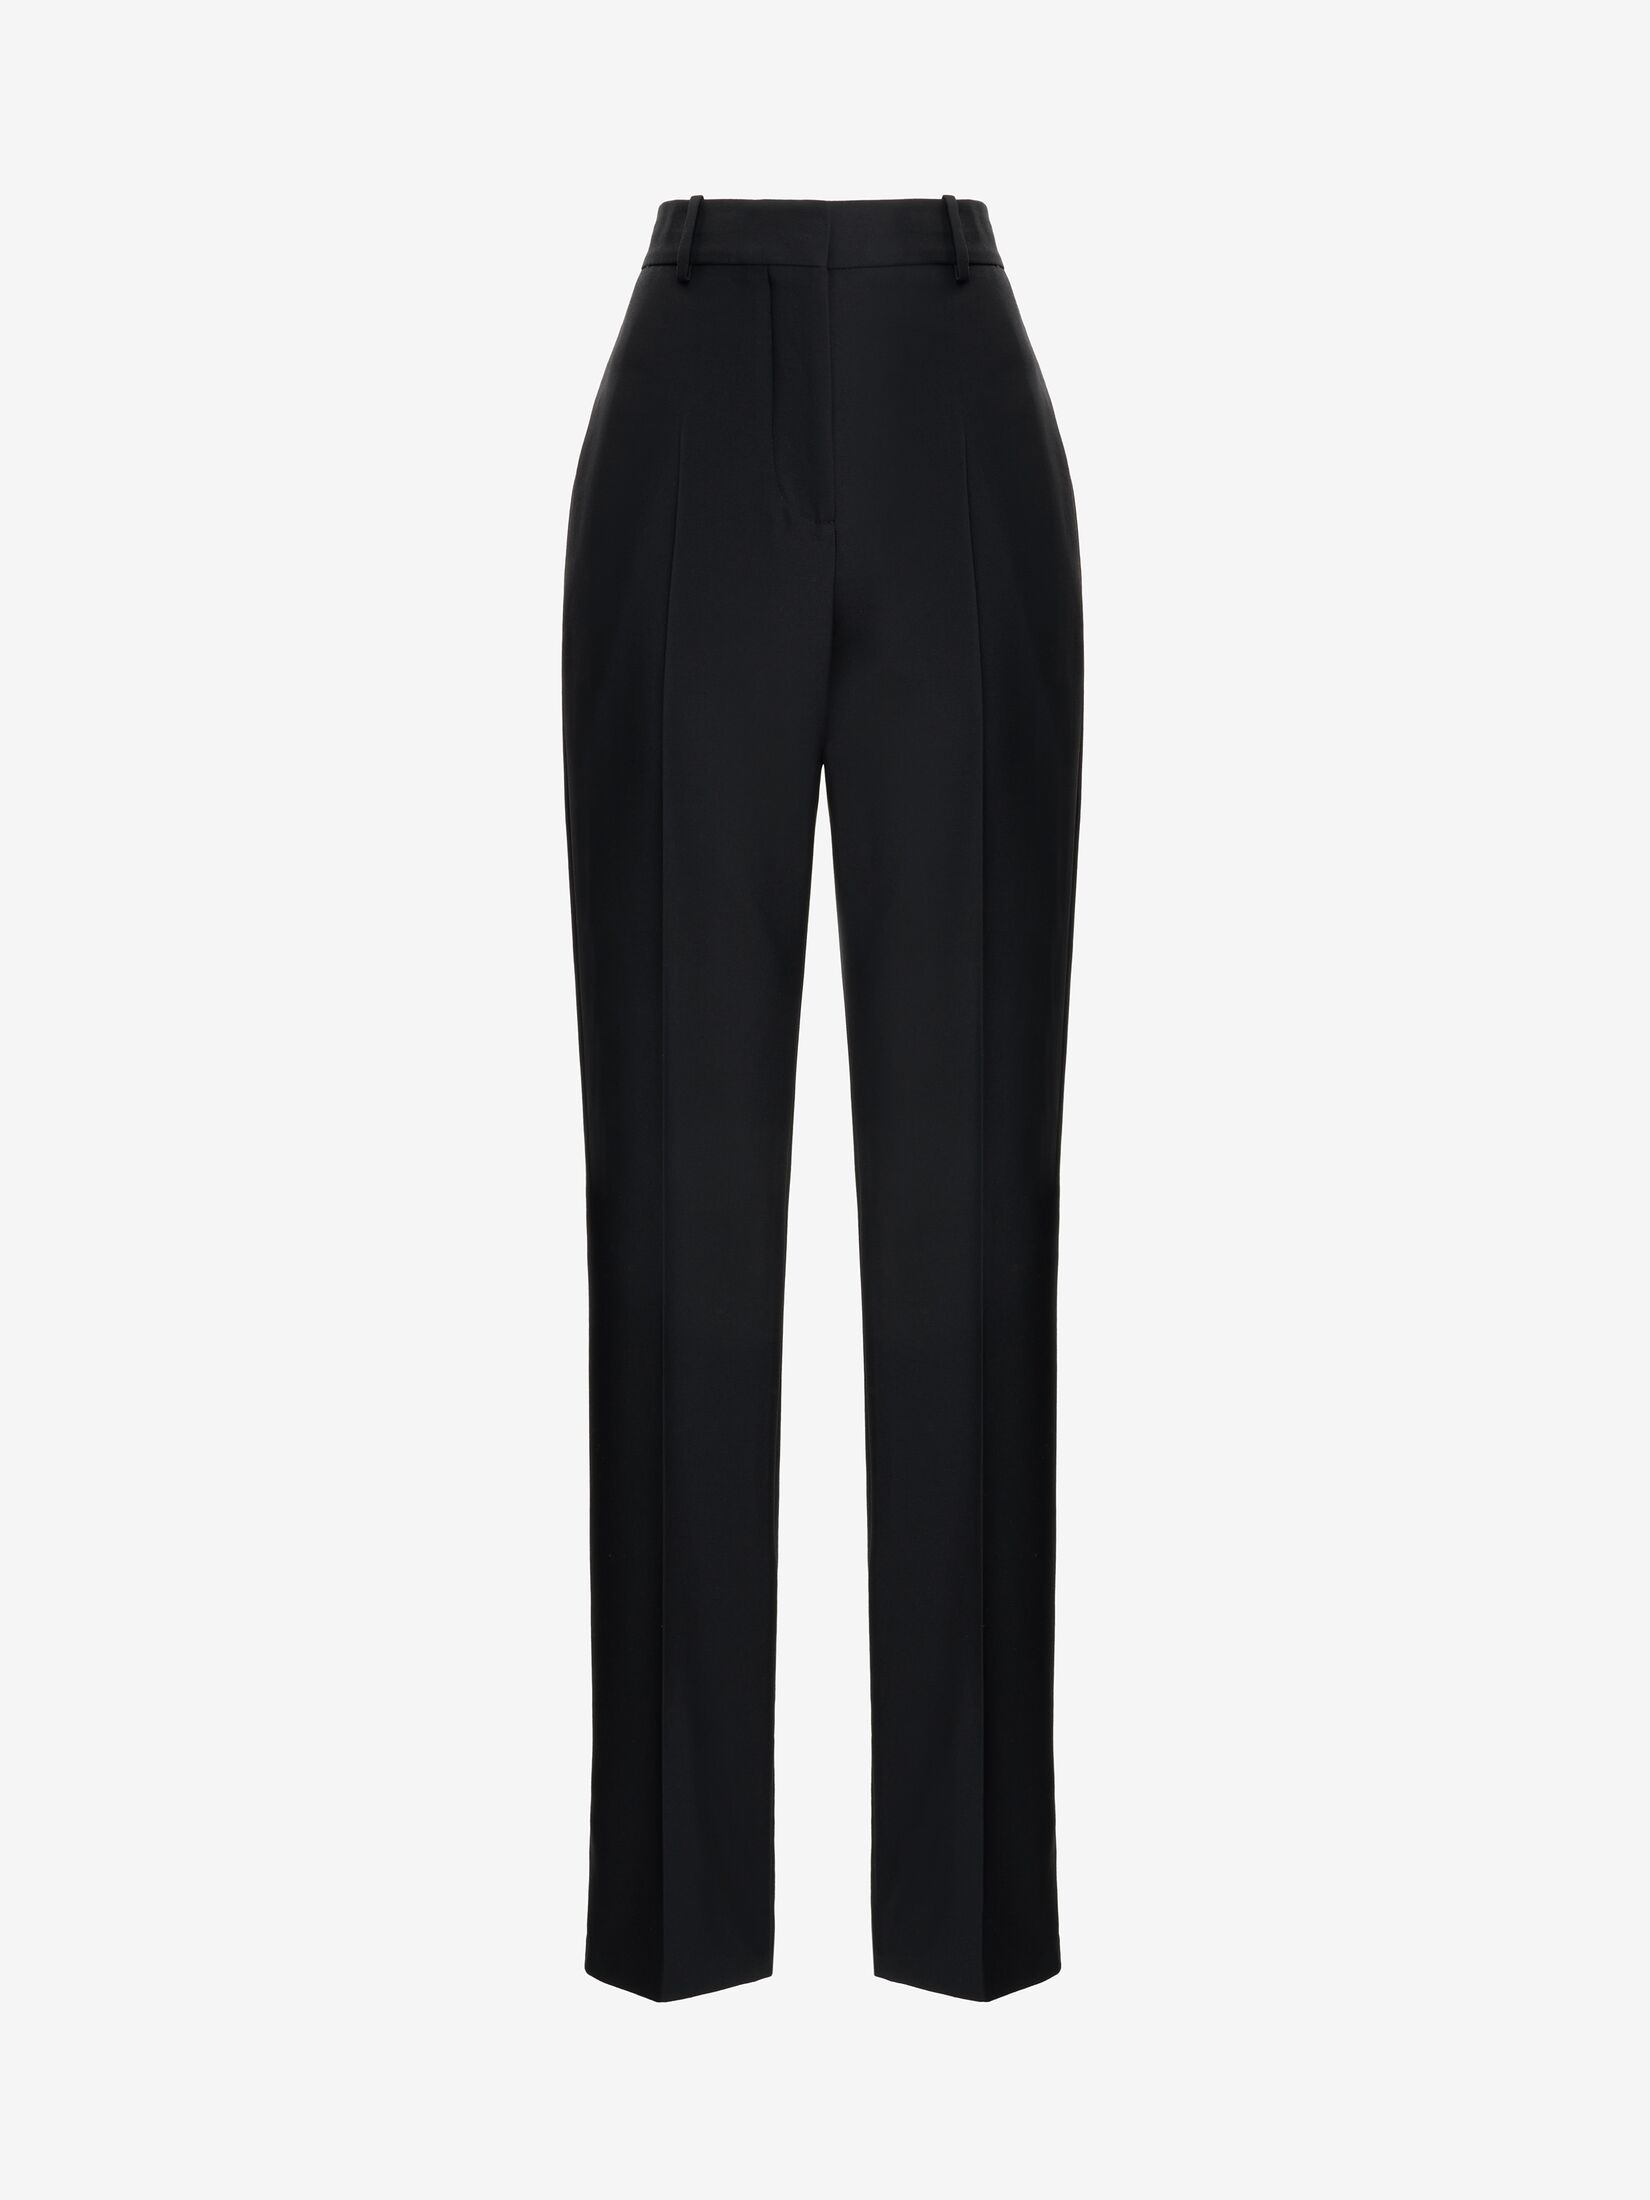 High-waisted Tuxedo Trousers in Black